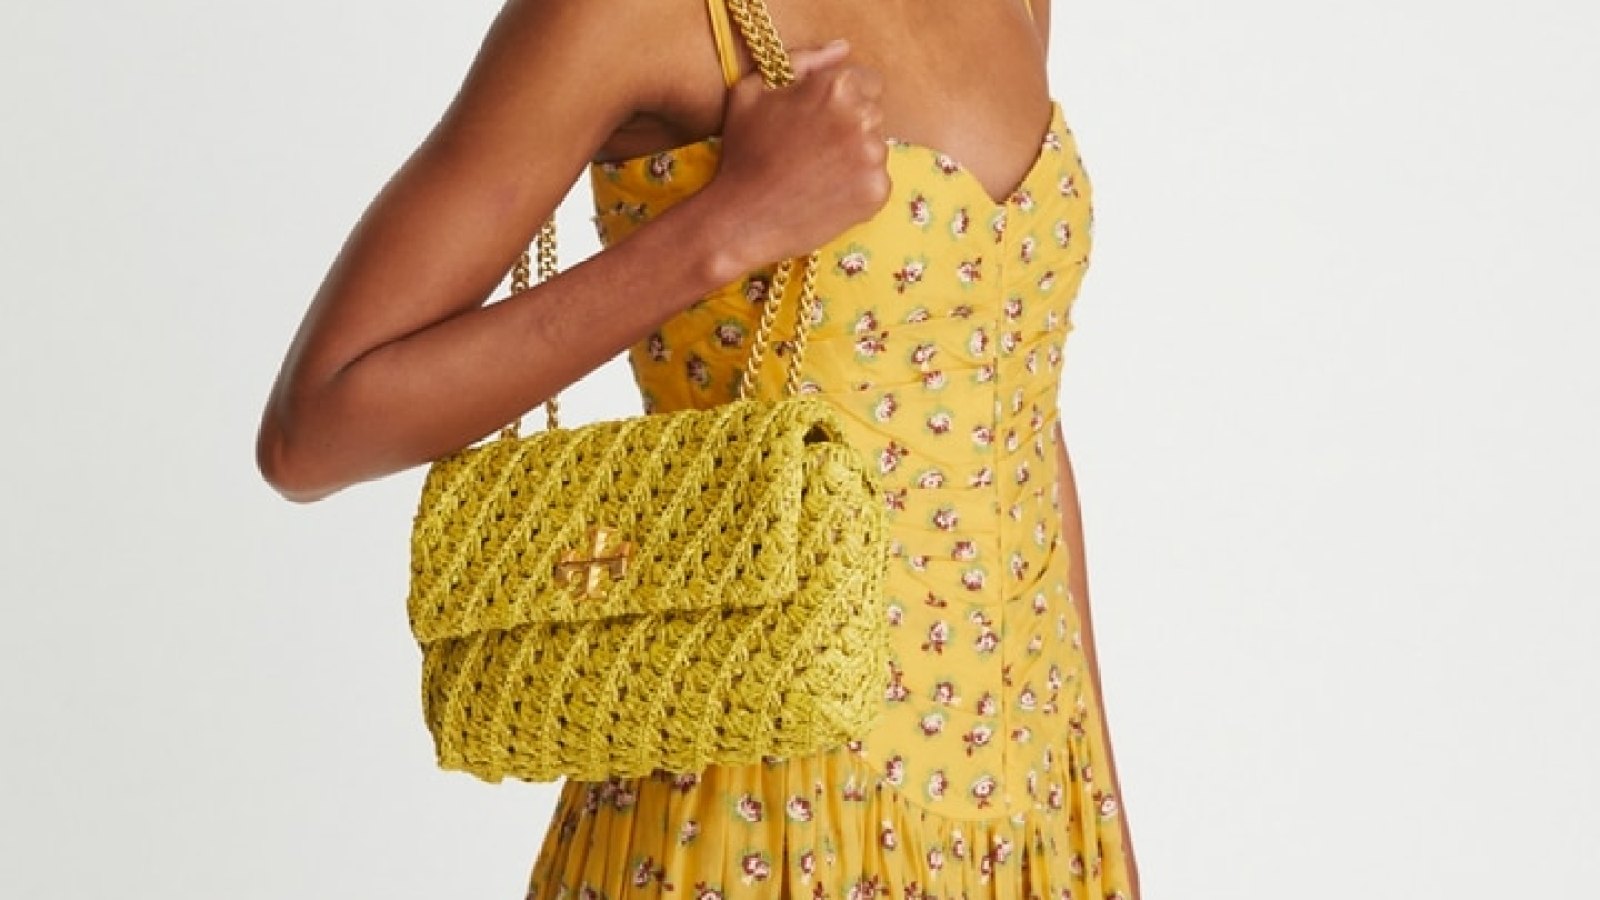 Tory Burch - Our Miller Mini Bucket Bag Great for casual days and